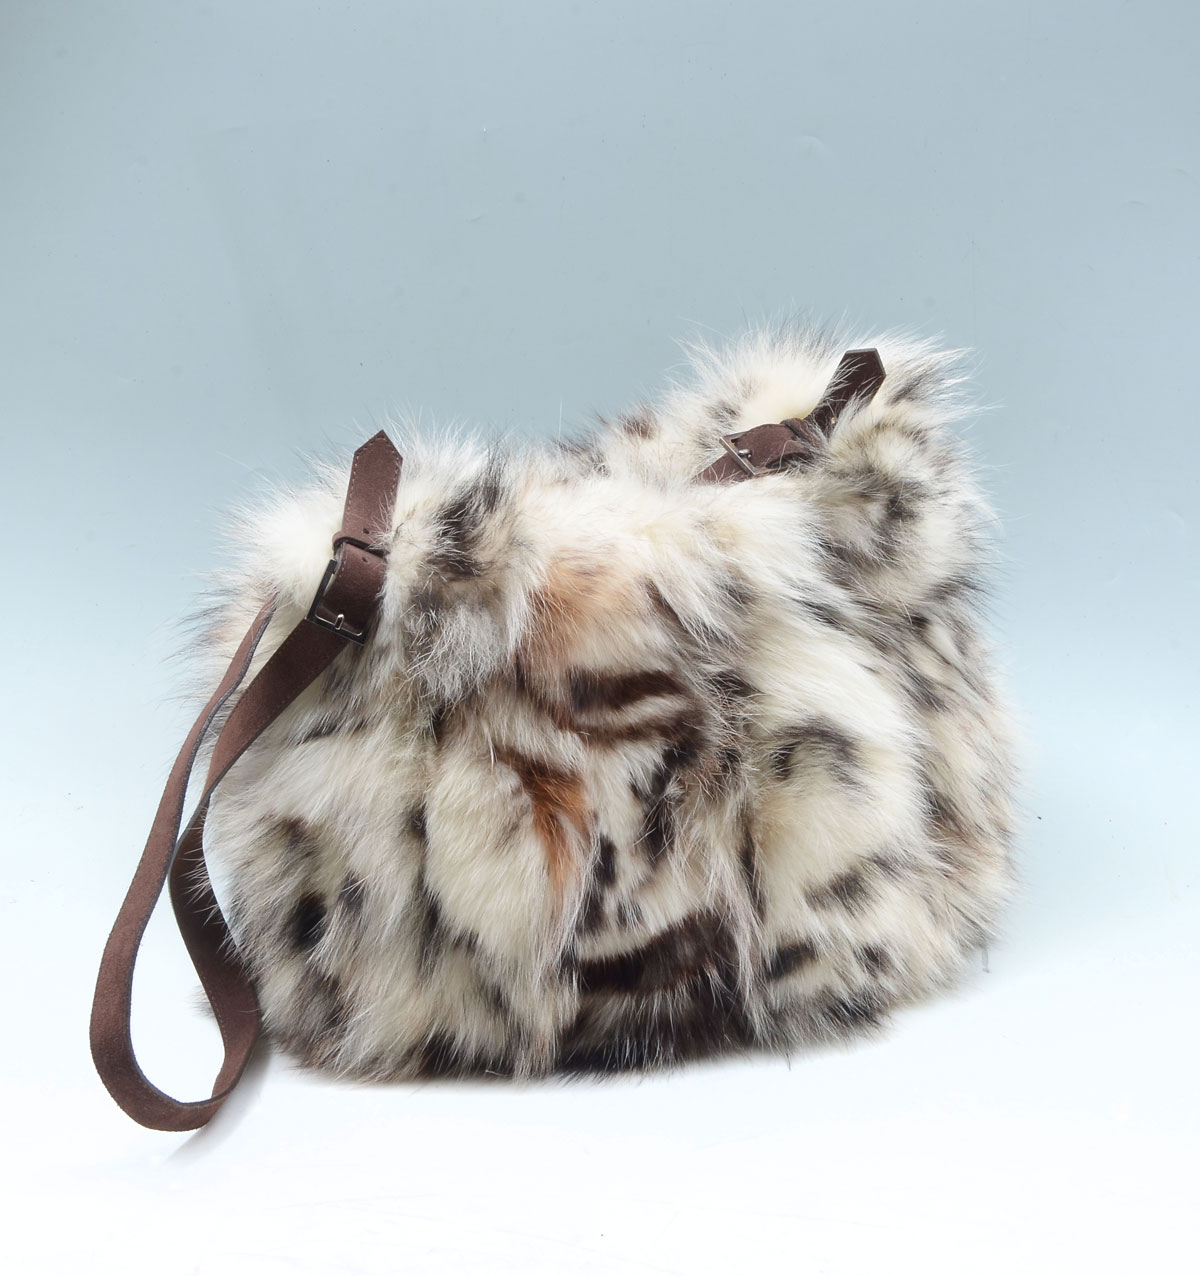 SPOTTED LYNX FUR PURSE: Spotted